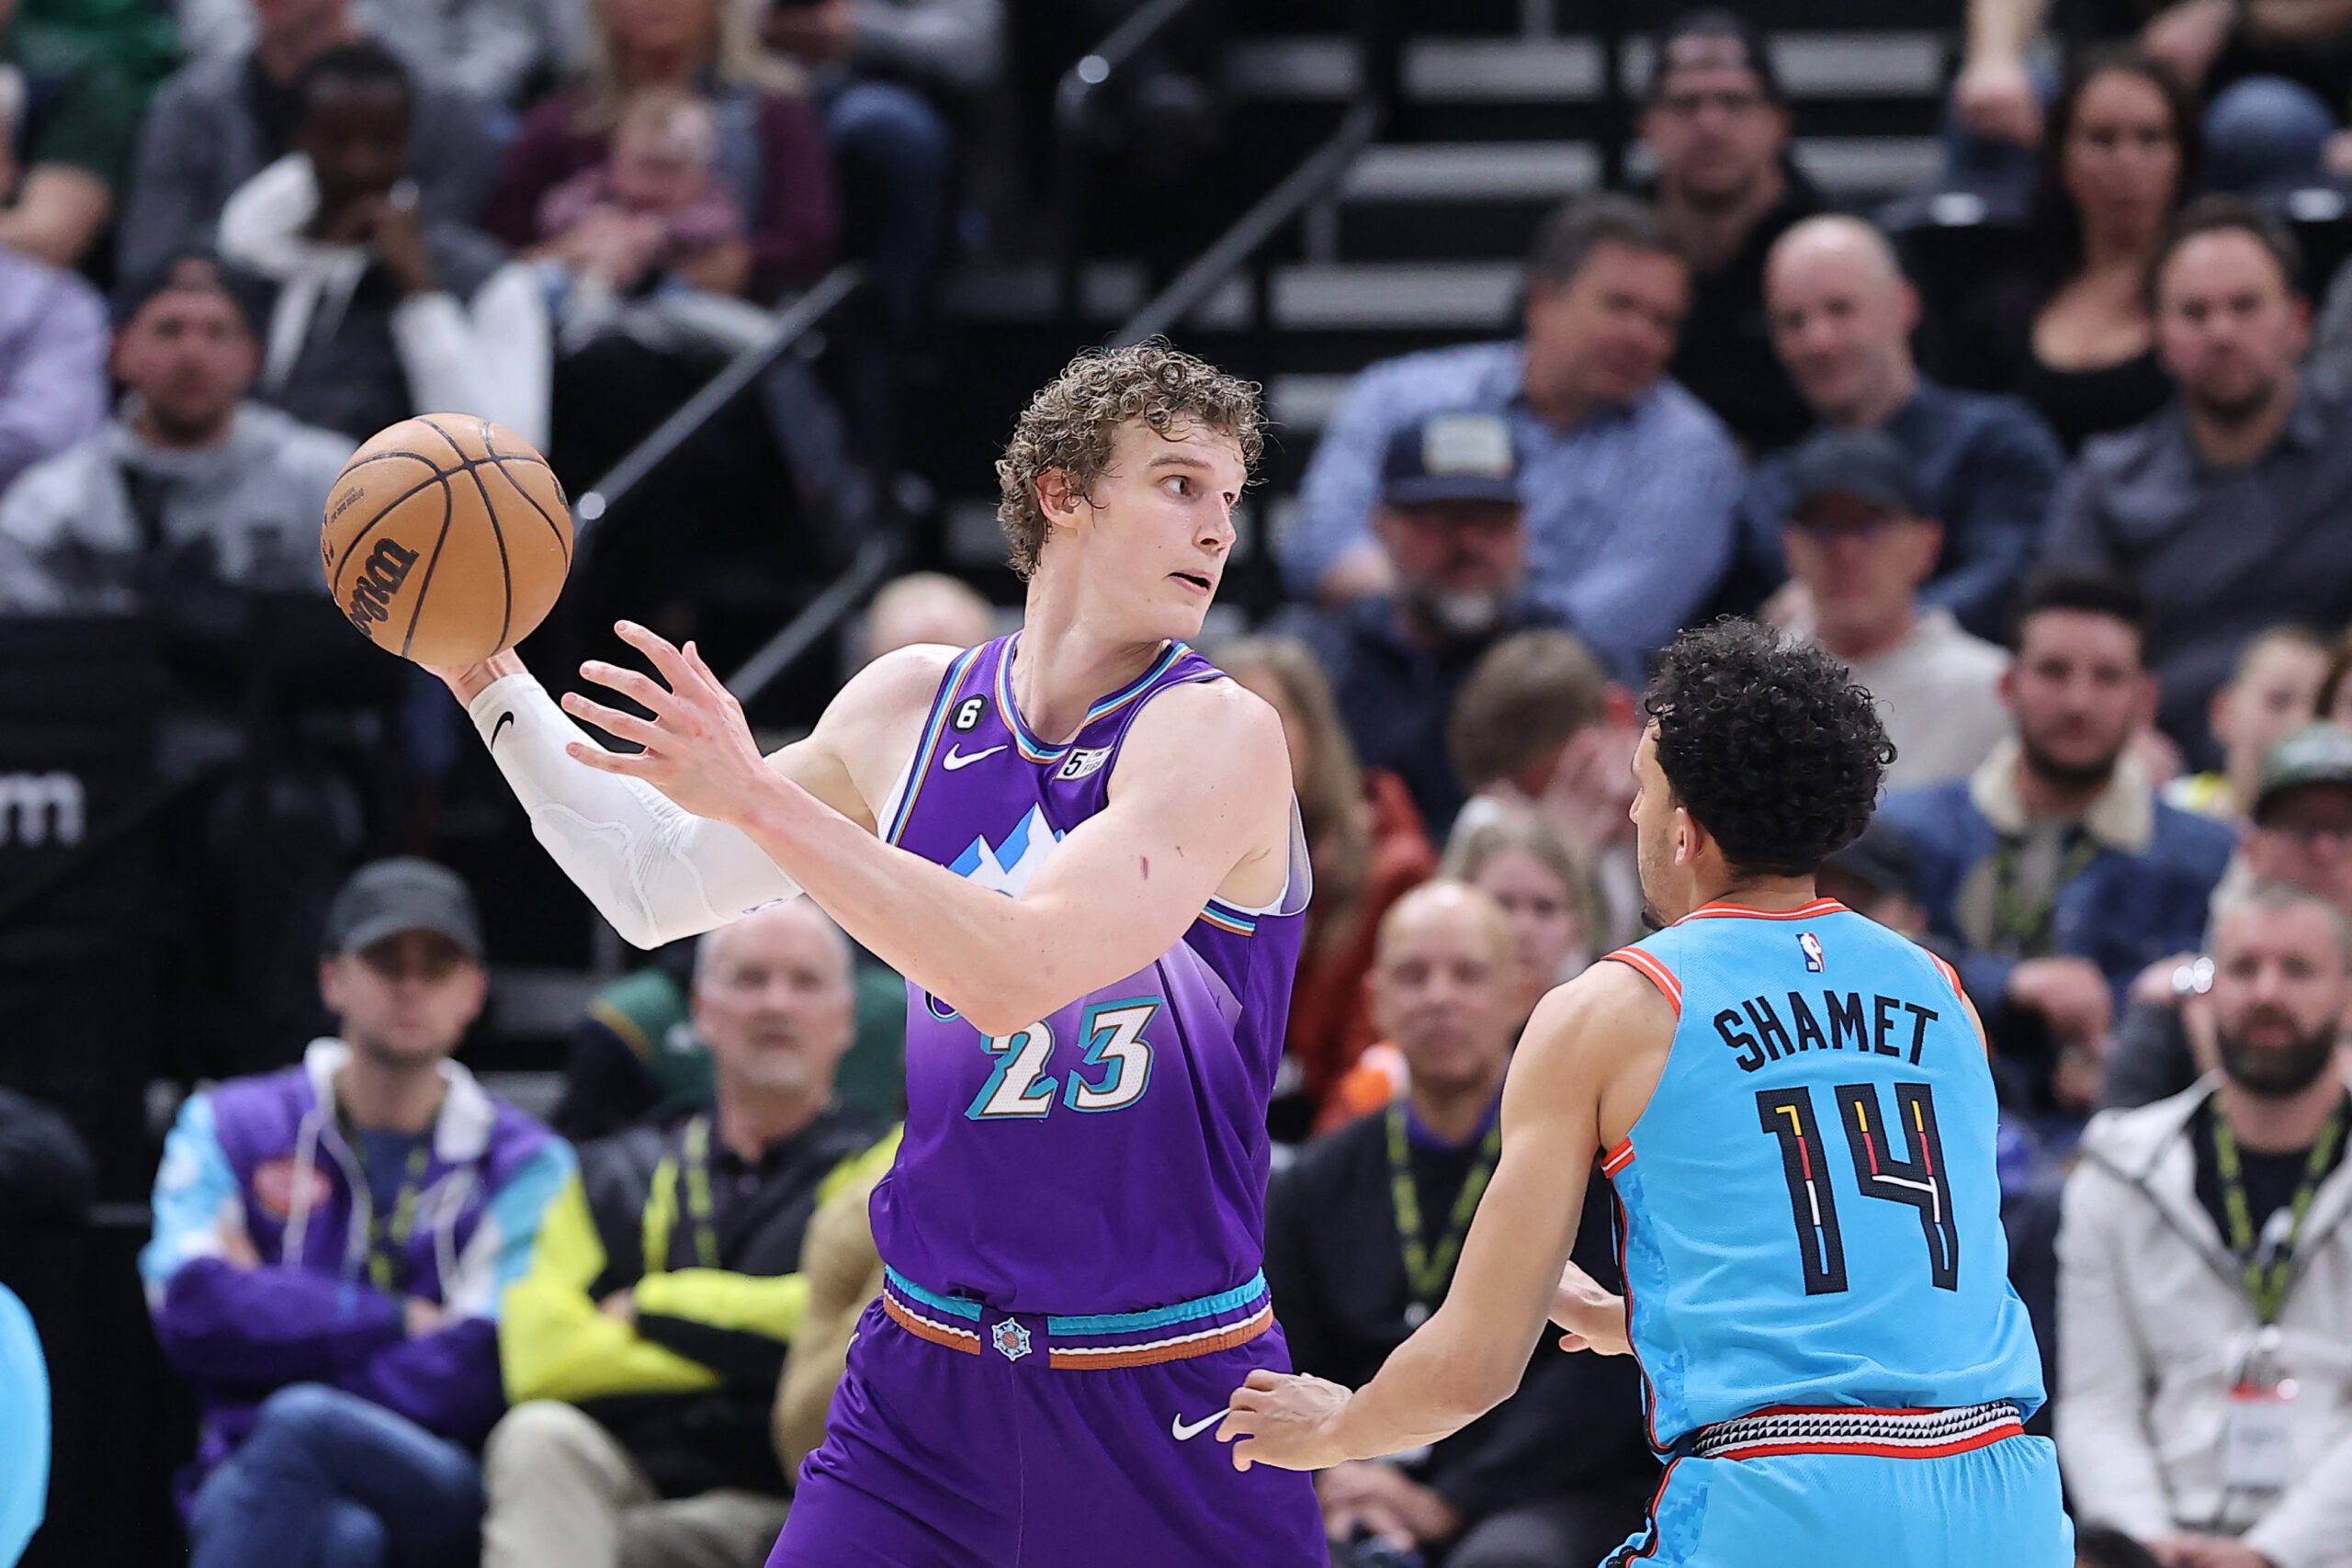 Lauri Markkanen joins Cleveland Cavaliers as part of sign-and